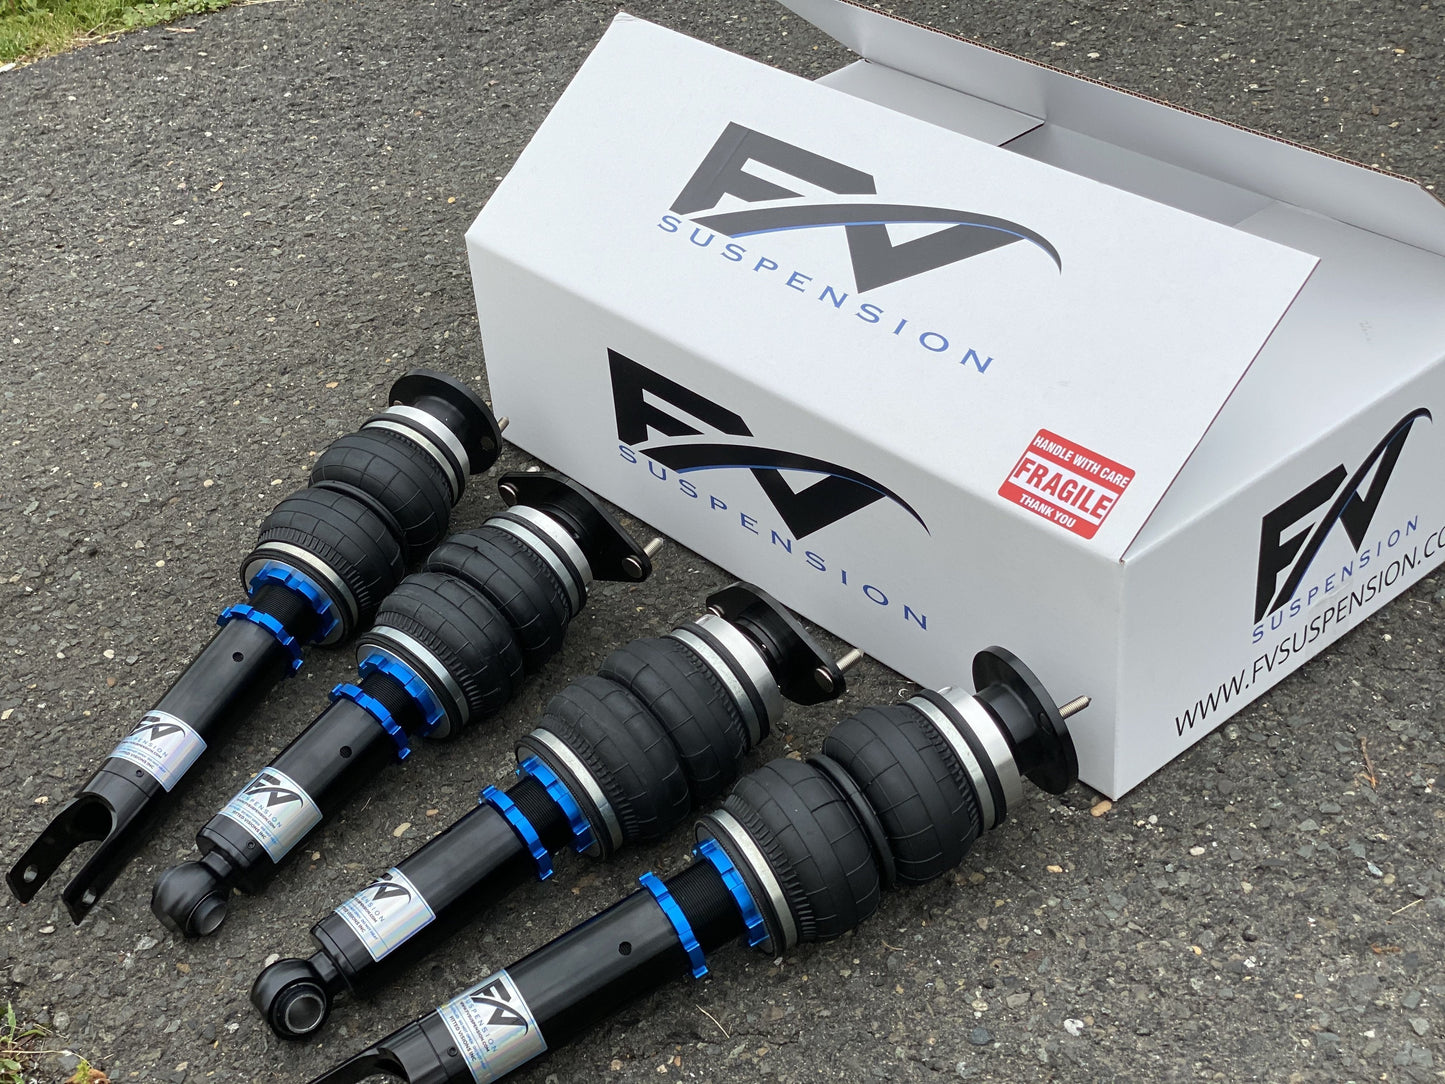 FV Suspension Tier 1 Budget kit Complete Air Ride kit for 21-24 Ford Mustang Mach E - Full Kit